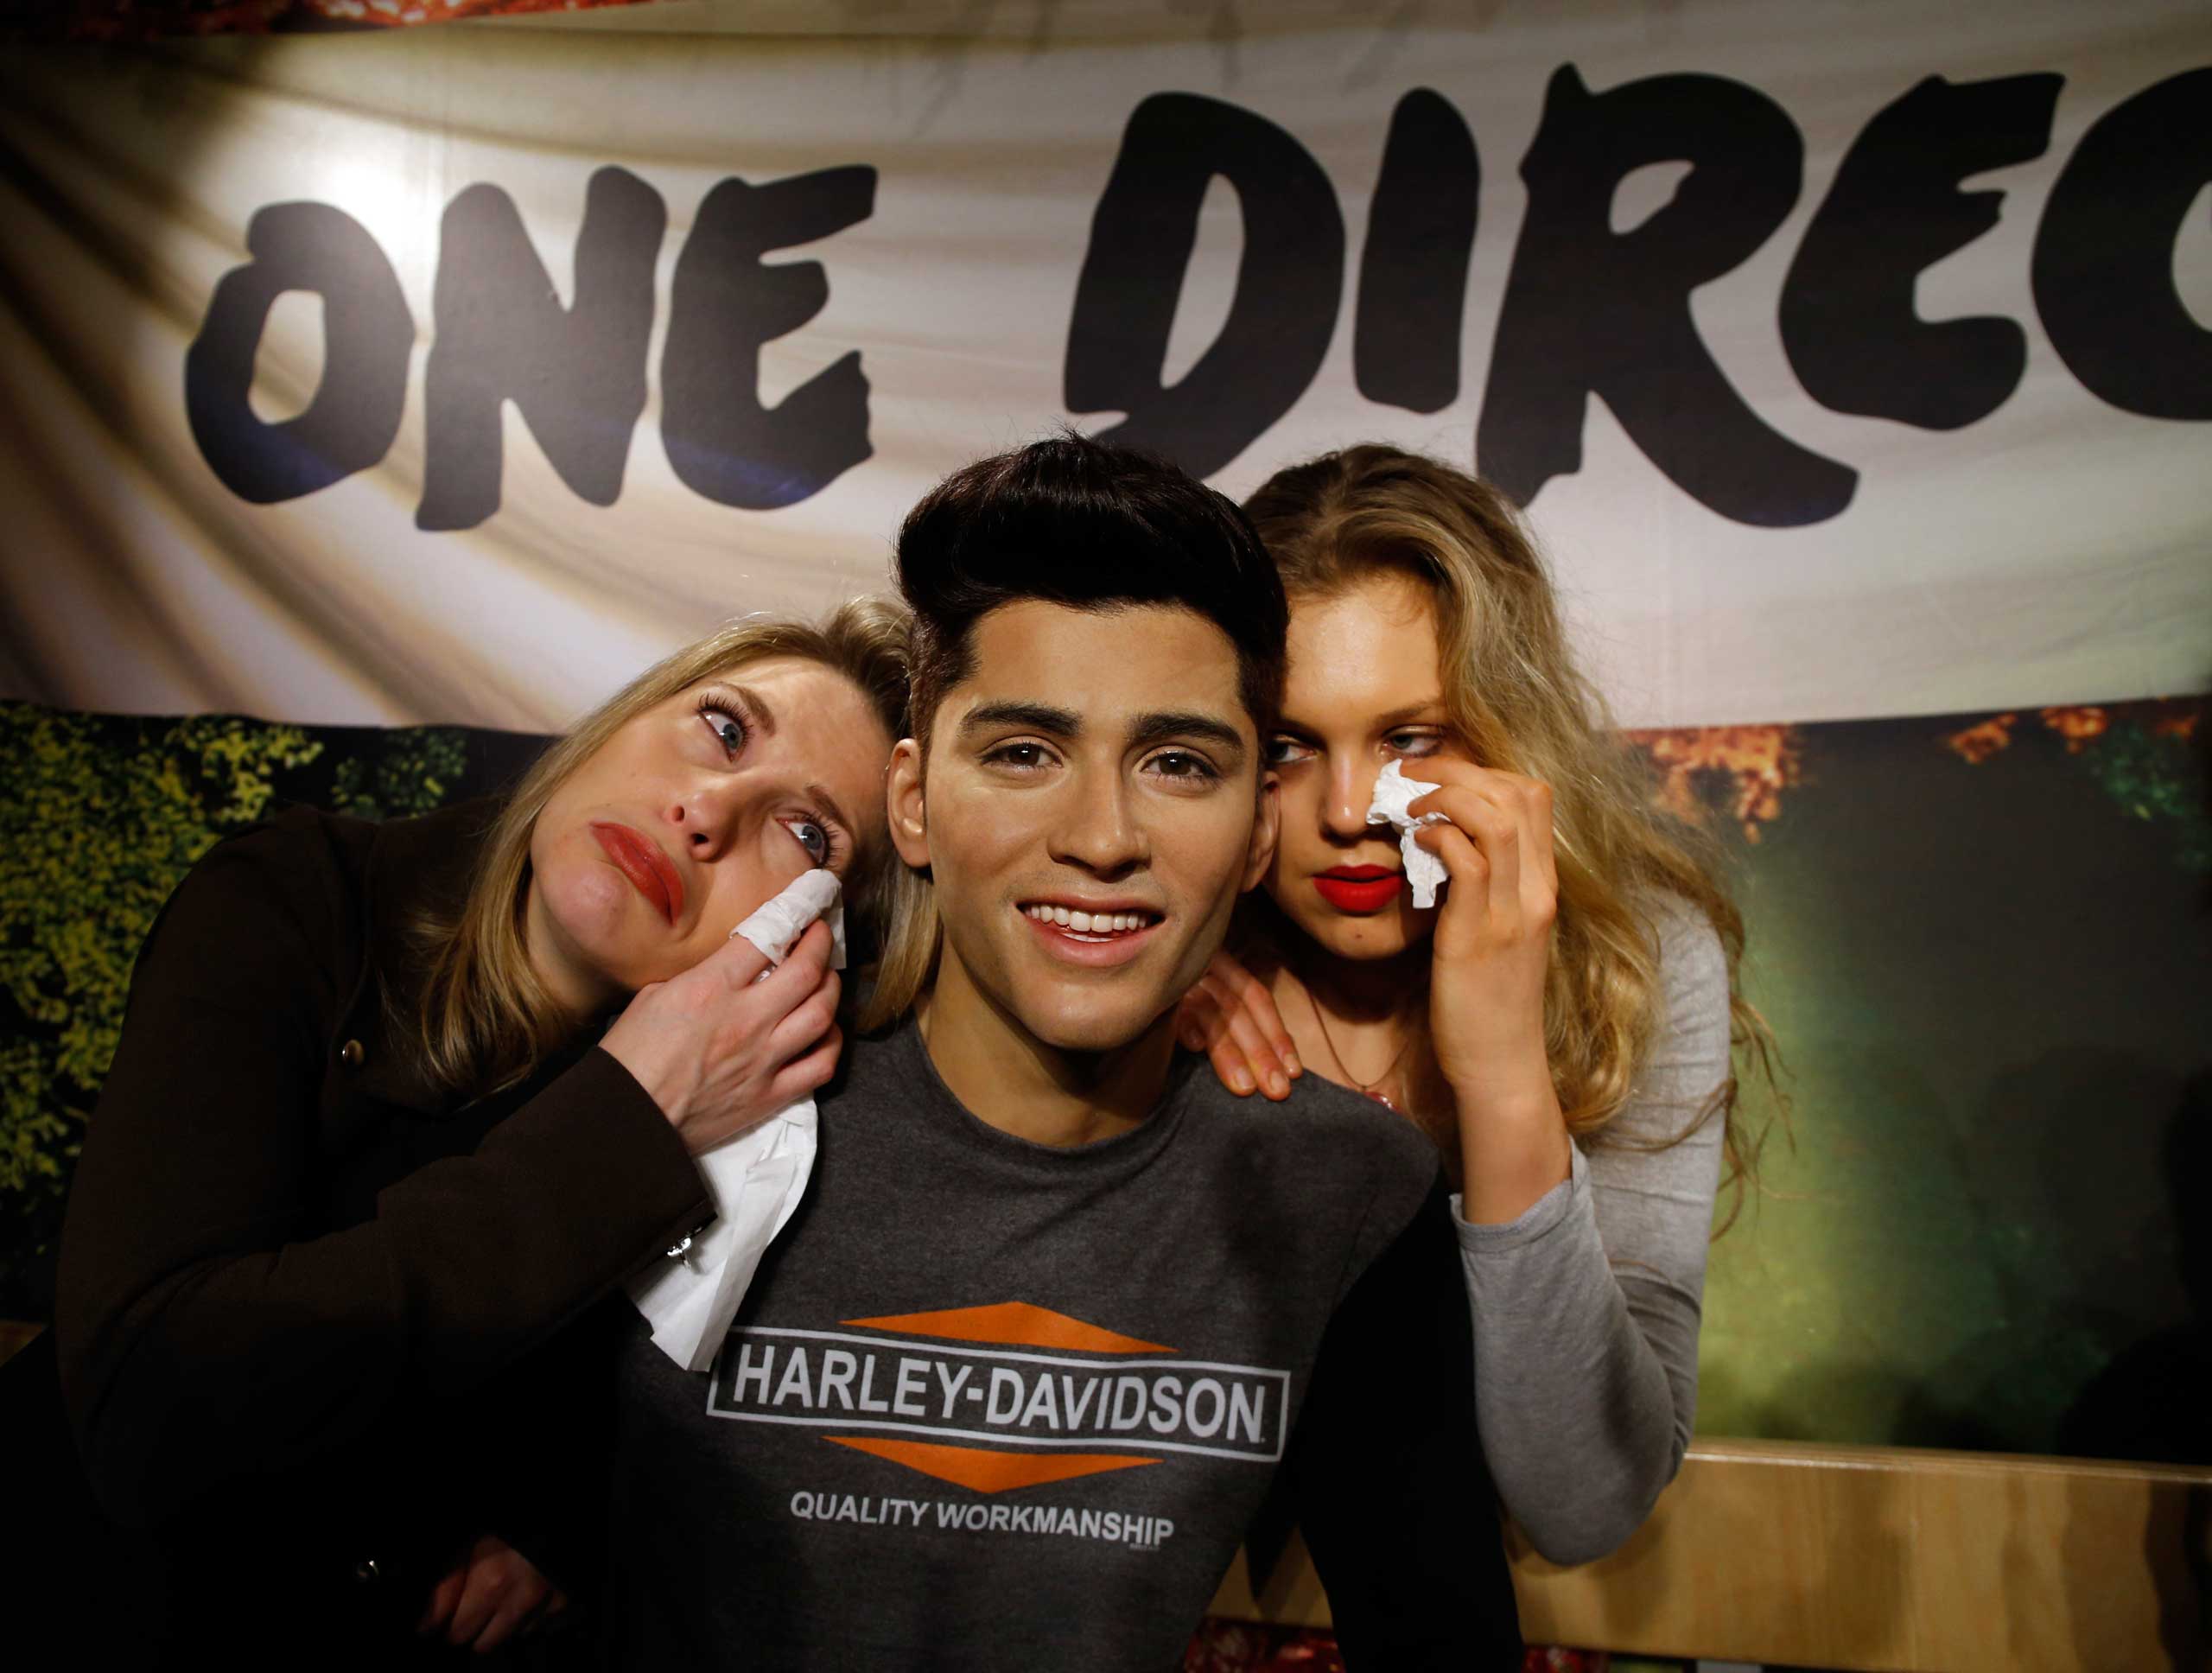 Madame Tussauds Appoint A Tissue Attendant For One Direction Fans After Zayn Malik's Departure